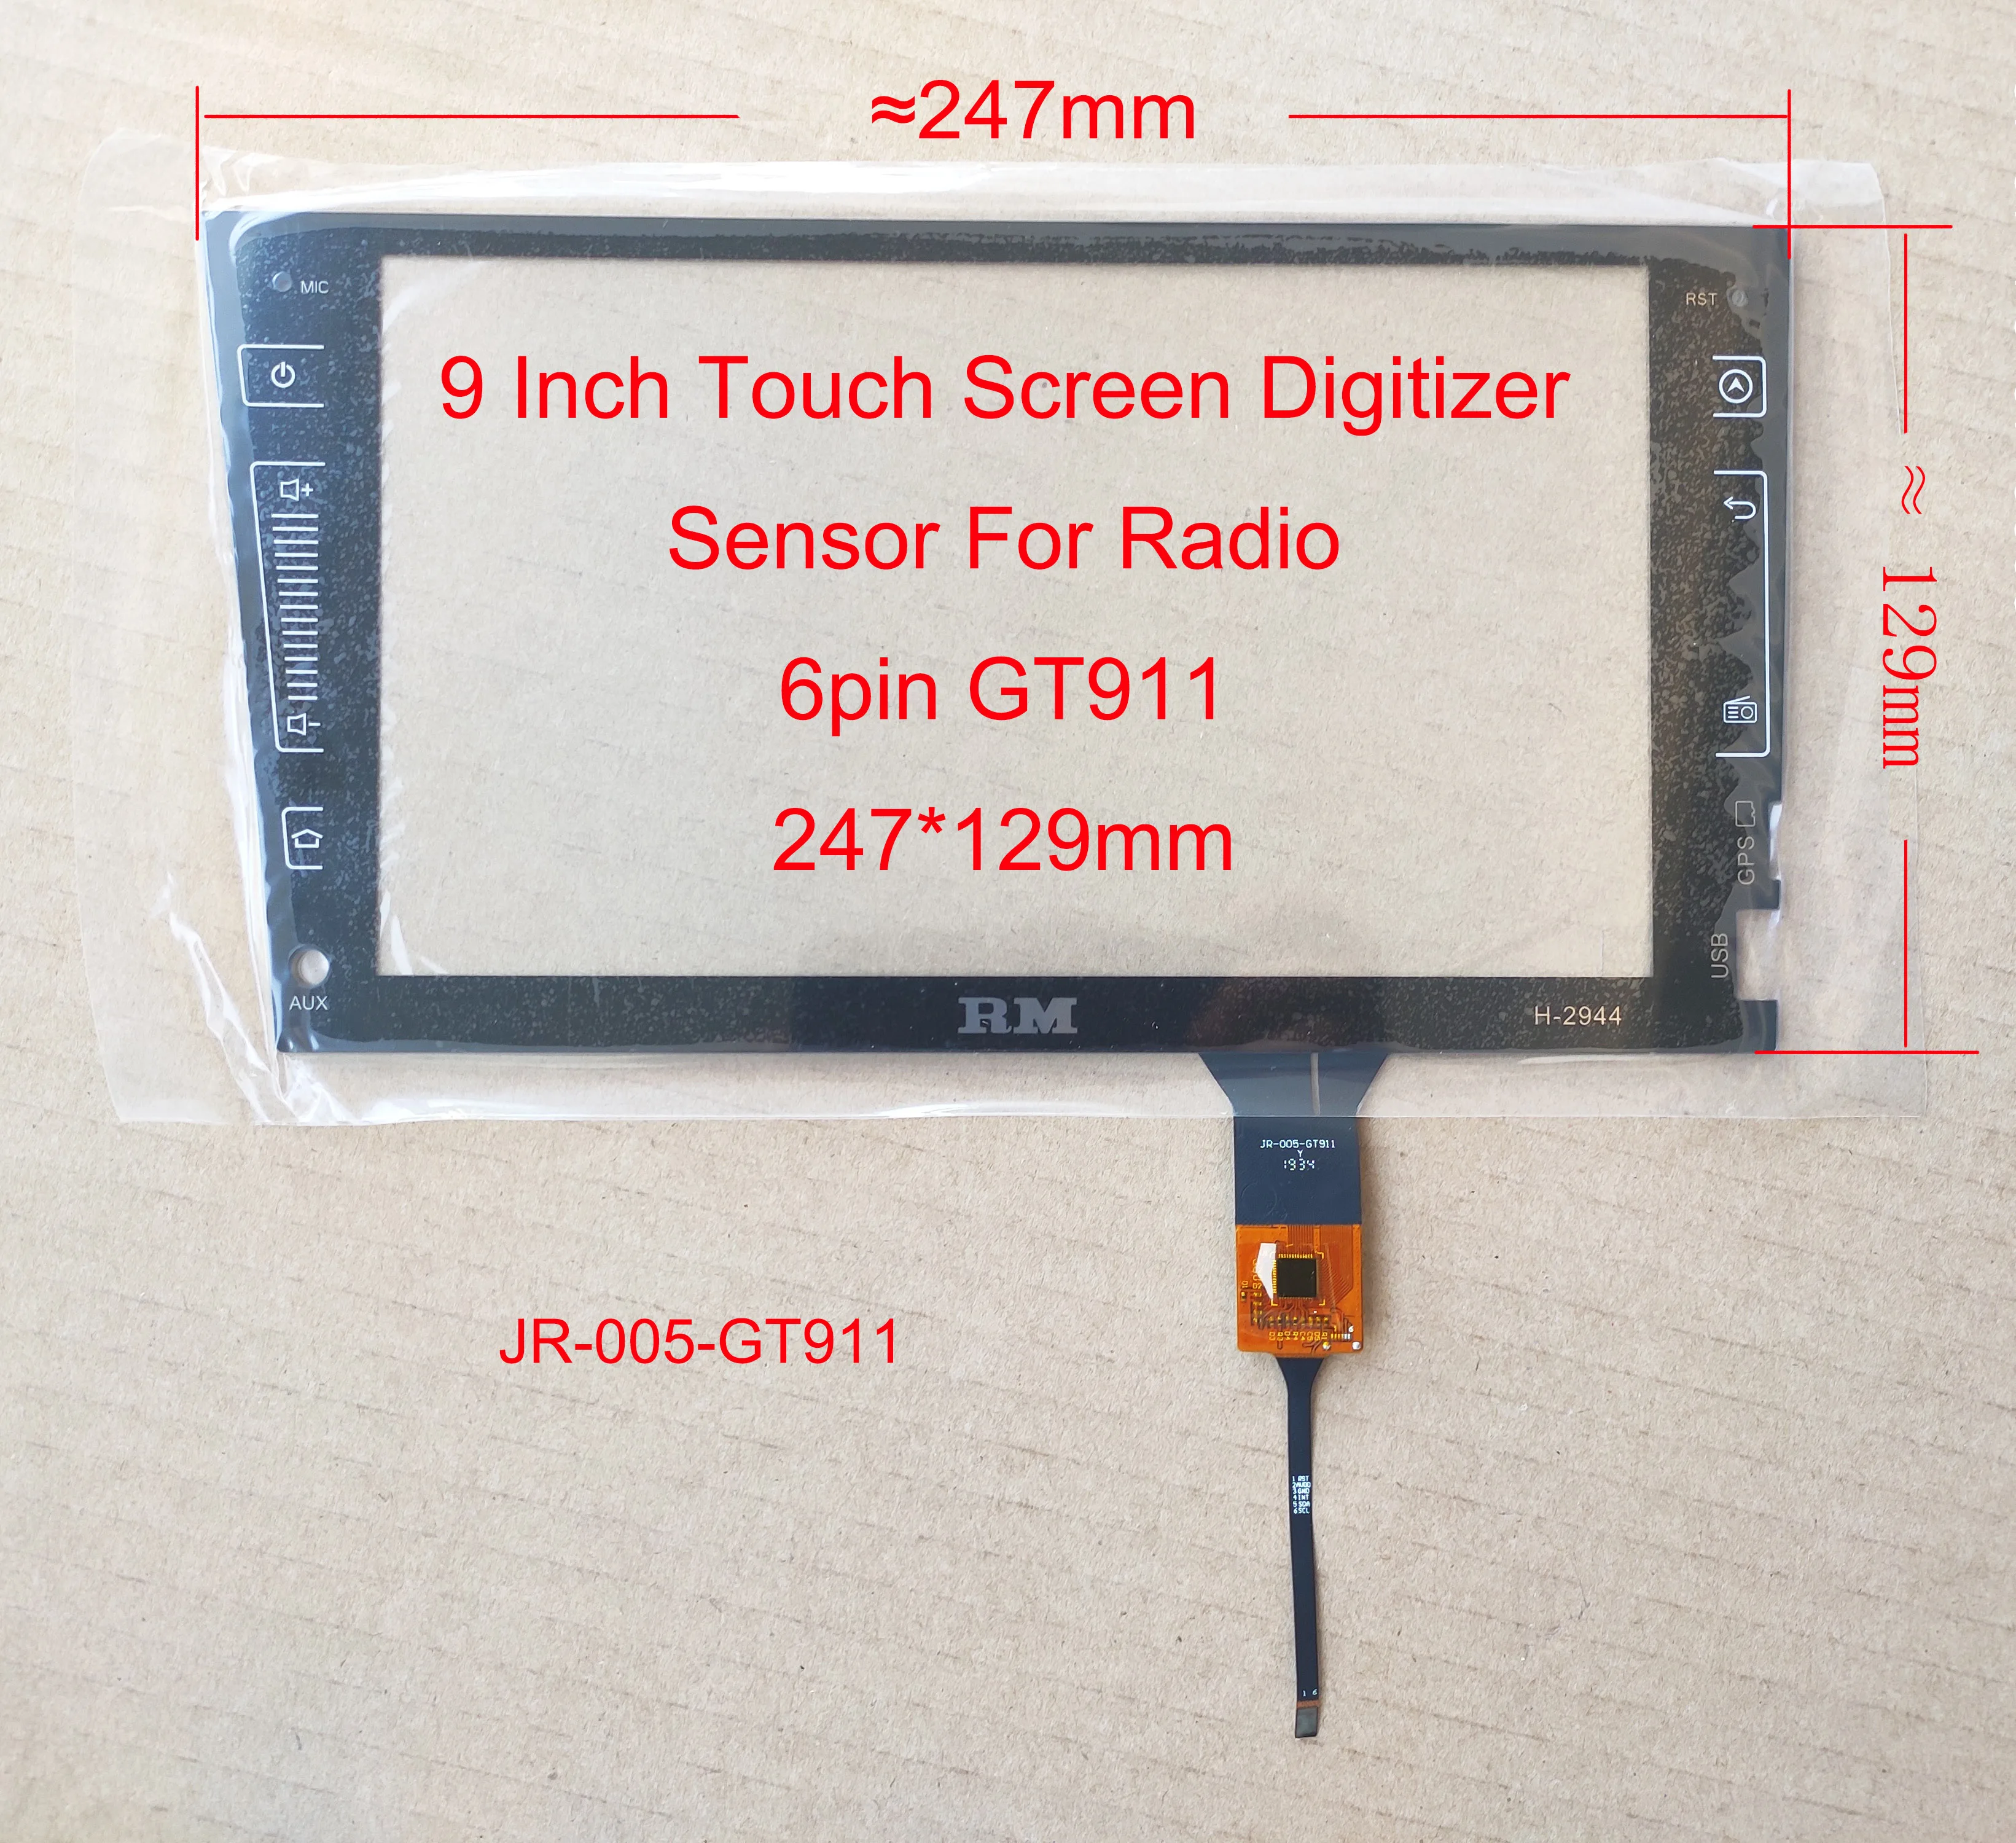 

9 Inch Sensor Digitizer Touch Screen Panel Hand Writer For Carplay Radio Capacitive 6Pin JR-005-GT911 247*129mm